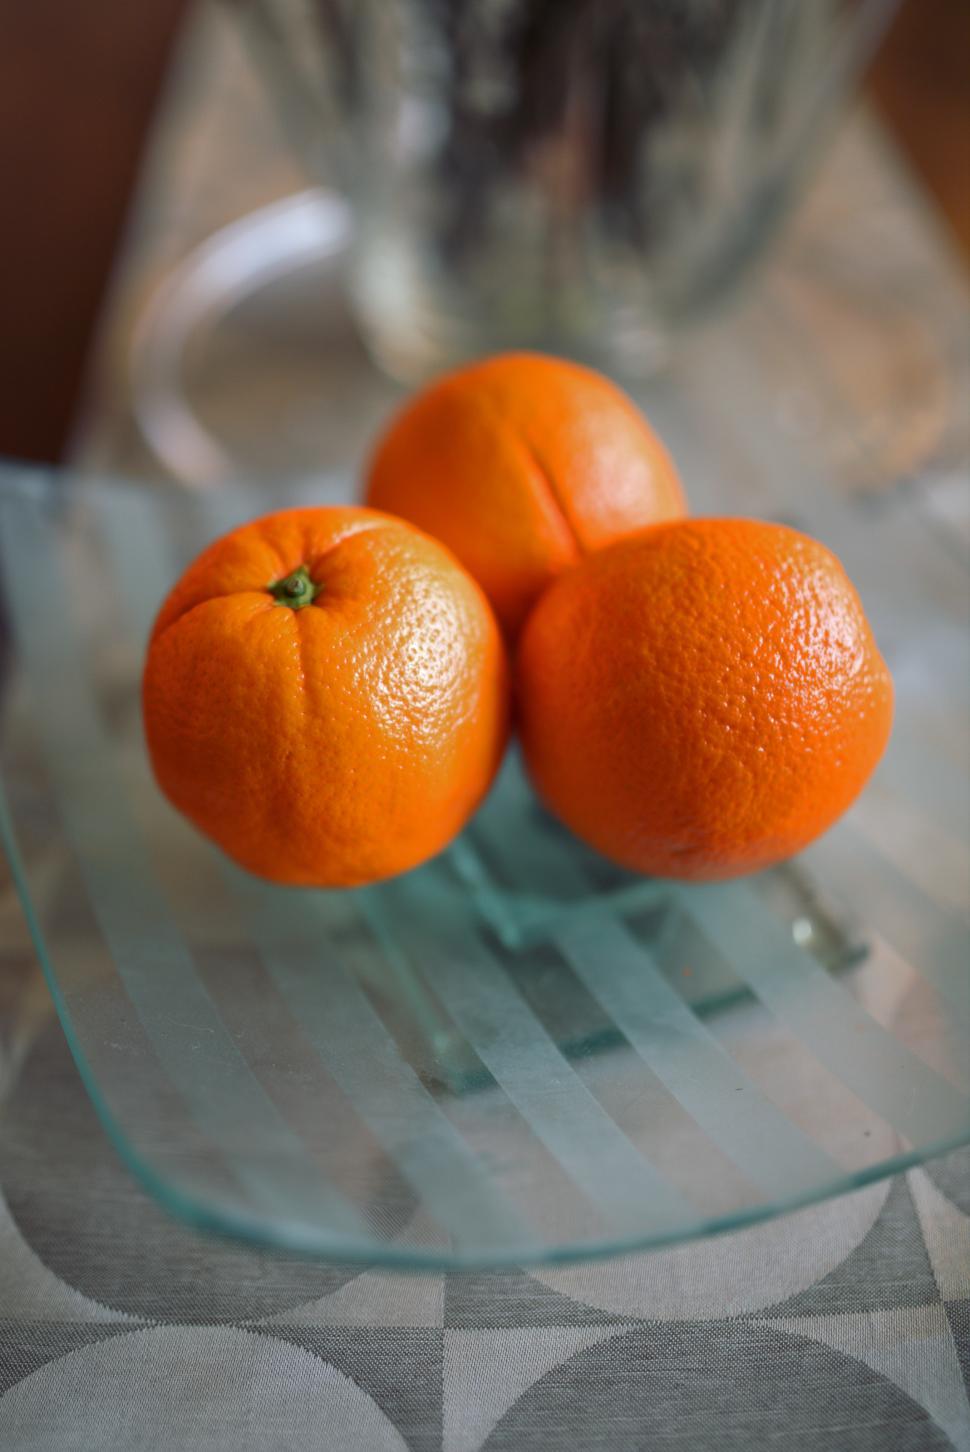 Free Image of Two Oranges on Glass Plate 